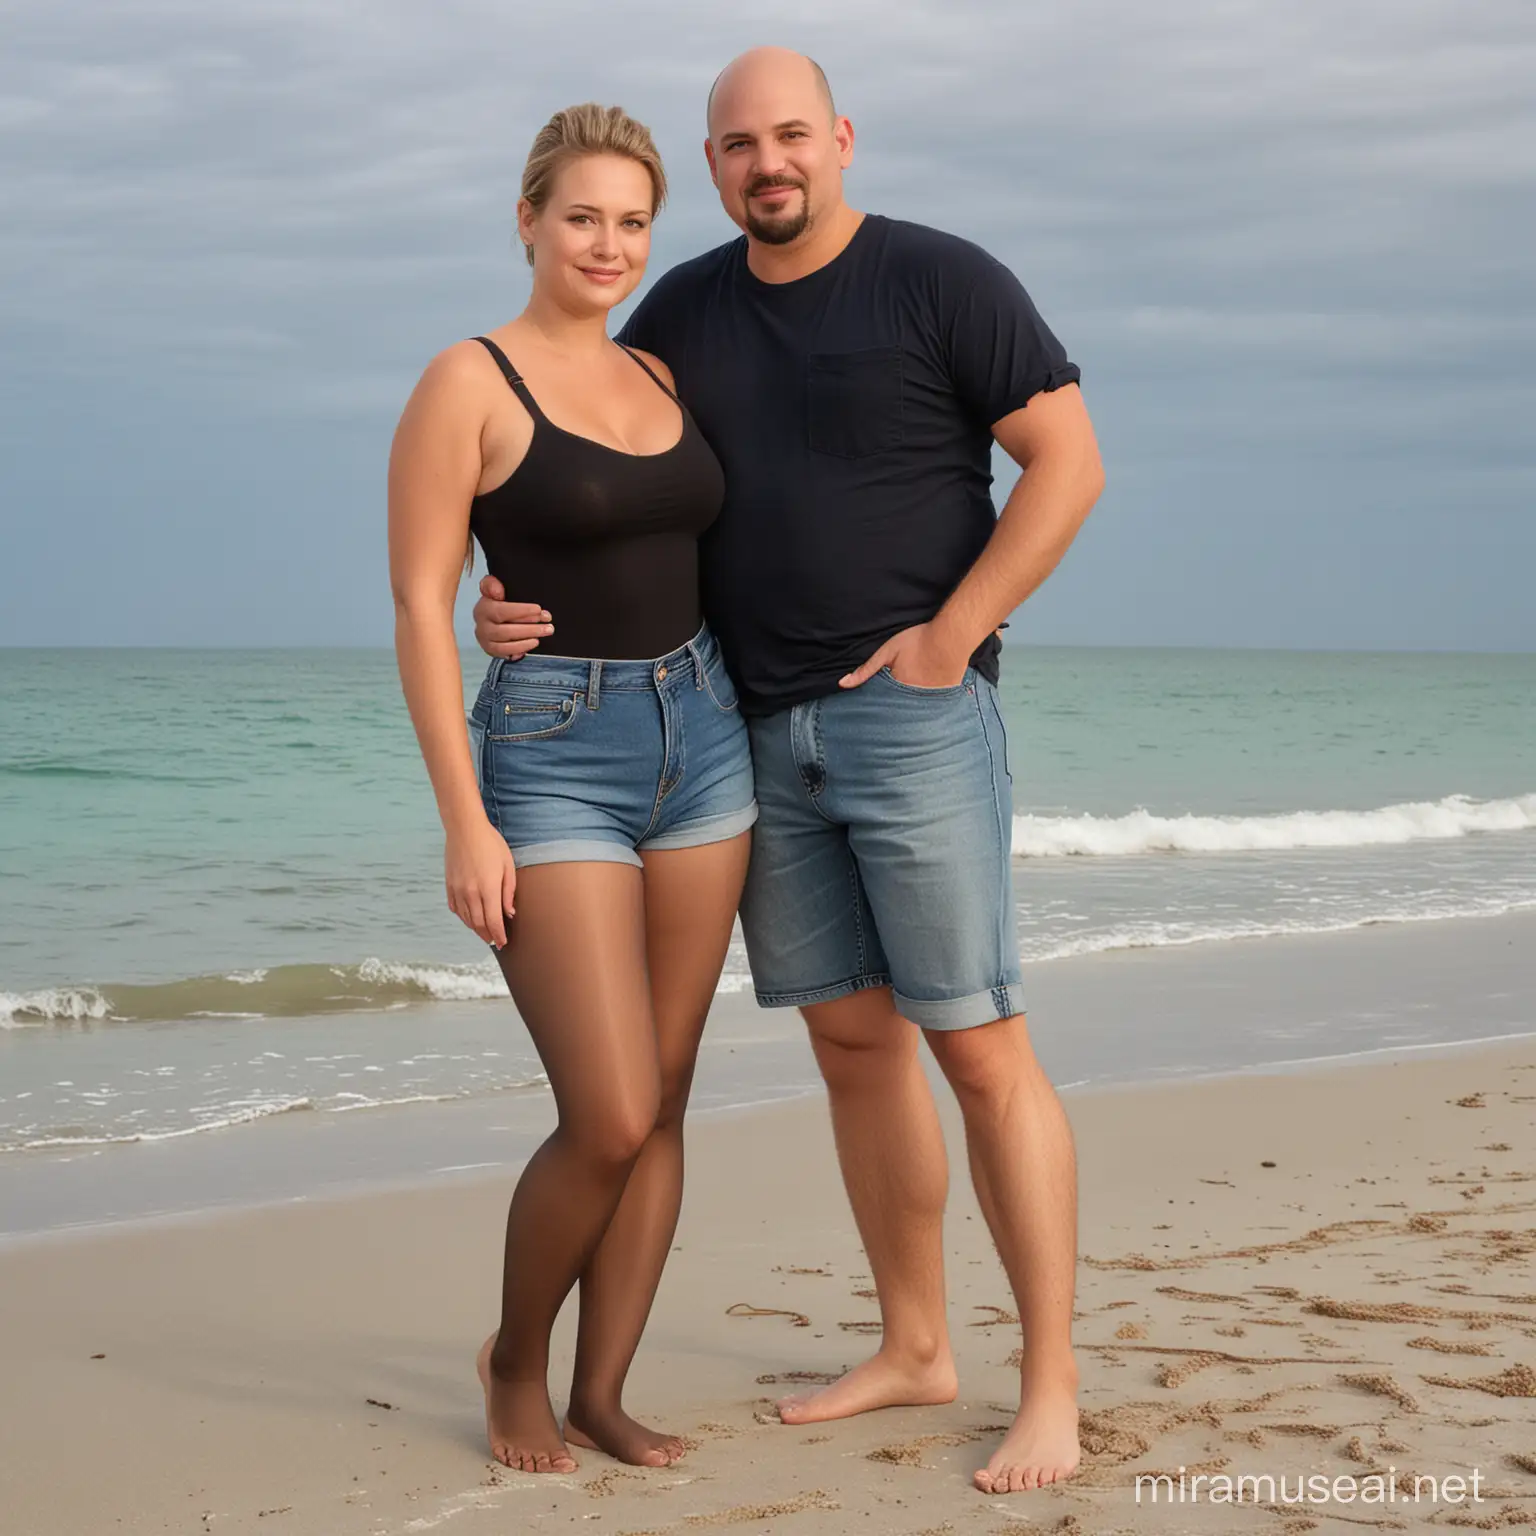 husband and wife on Florida sandy beach, fat chubby husband  35 years old, short, fat, bald, goatee, wearing jeans shorts and black button down shirts, wife 55 years old, shiny brown pantyhose nylon tights, fit, silver hair, shiny brown pantyhose nylon tights, denim blue jean shorts, grey tank top

